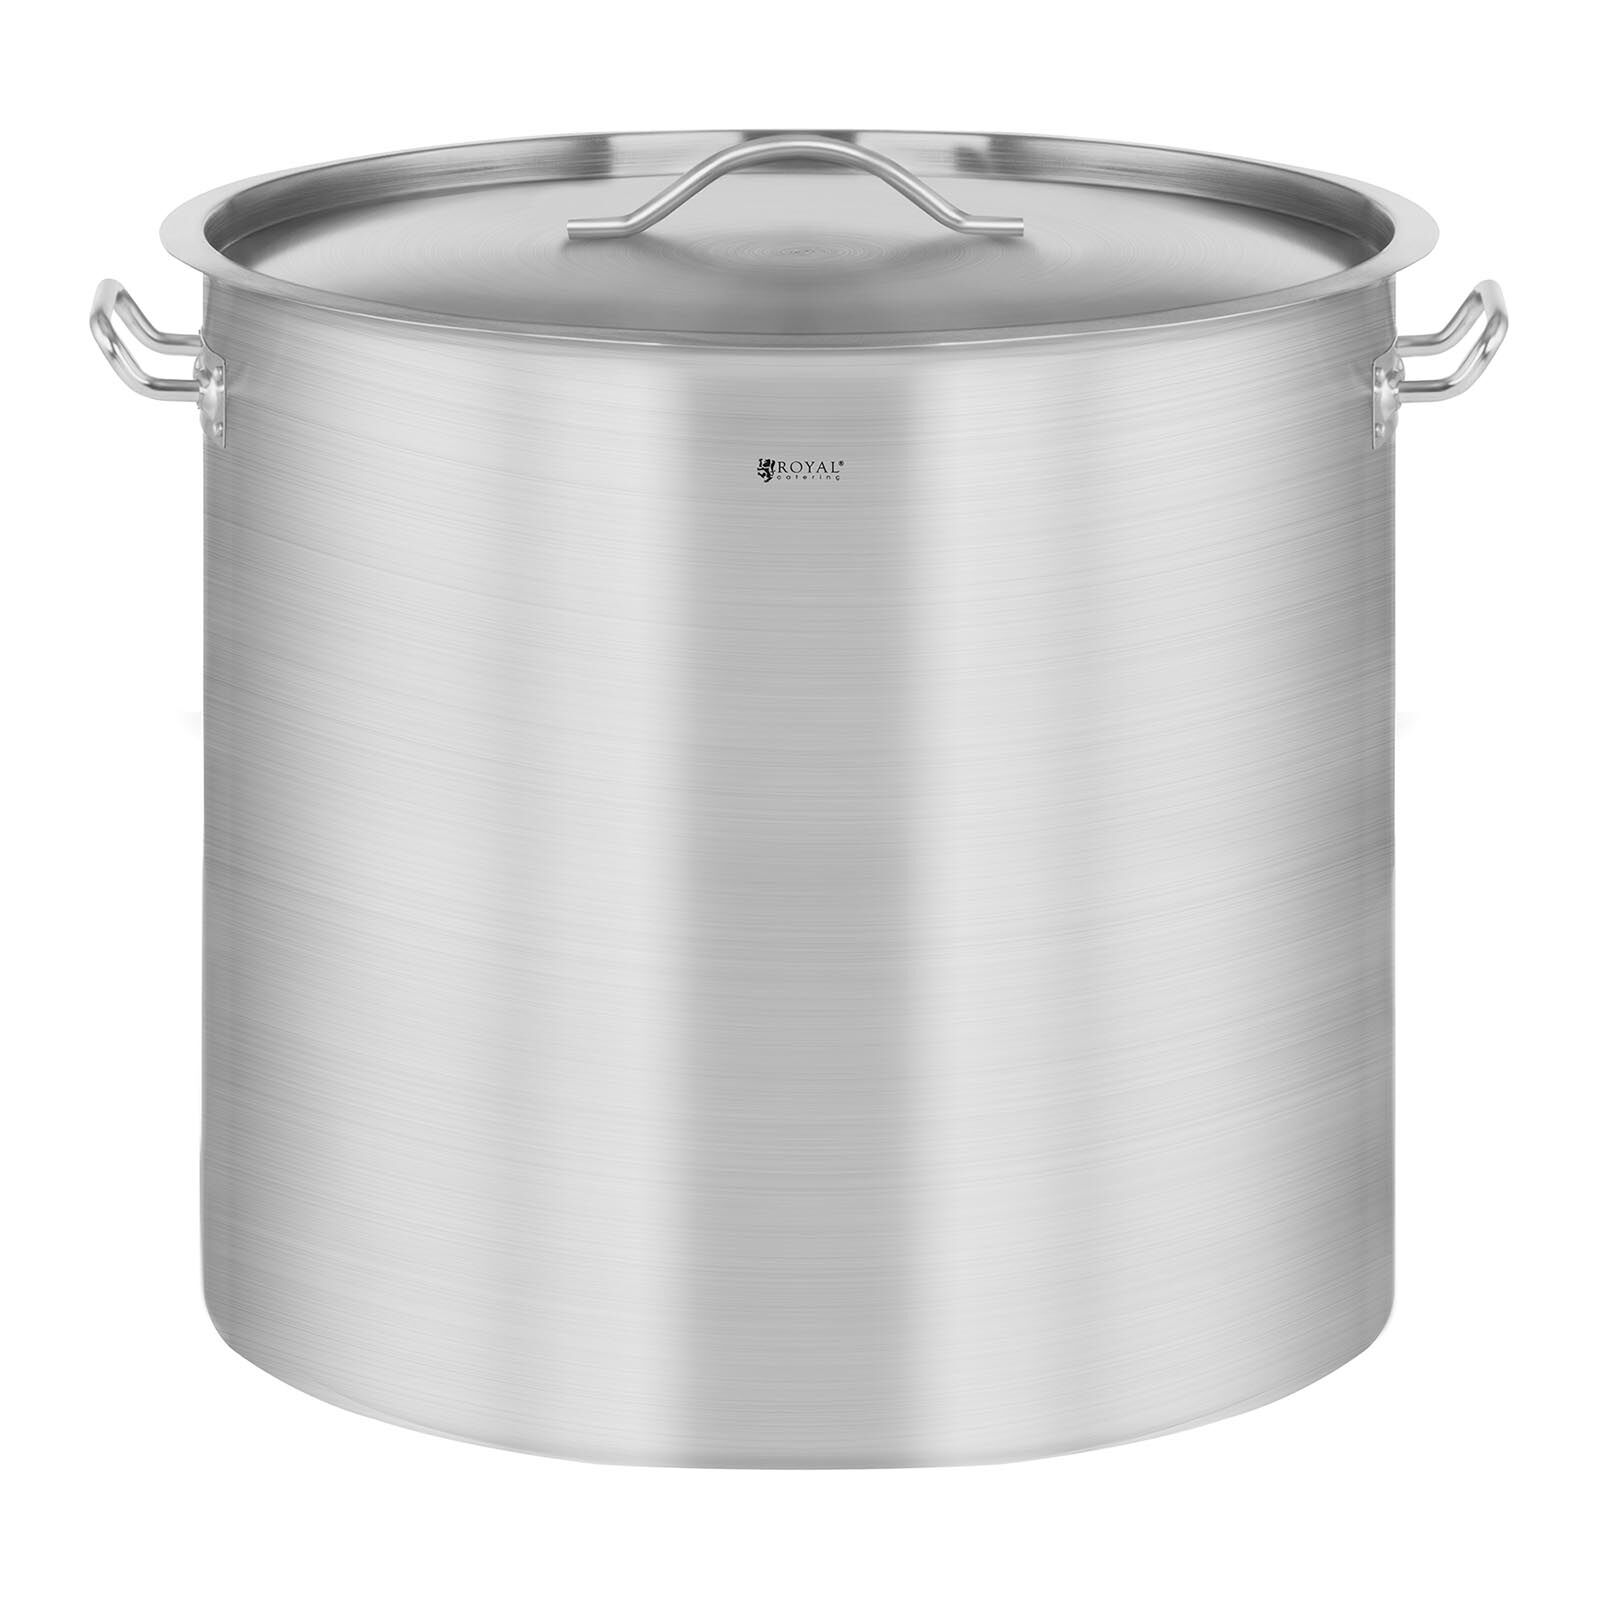 Royal Catering Induction Pot 50 L